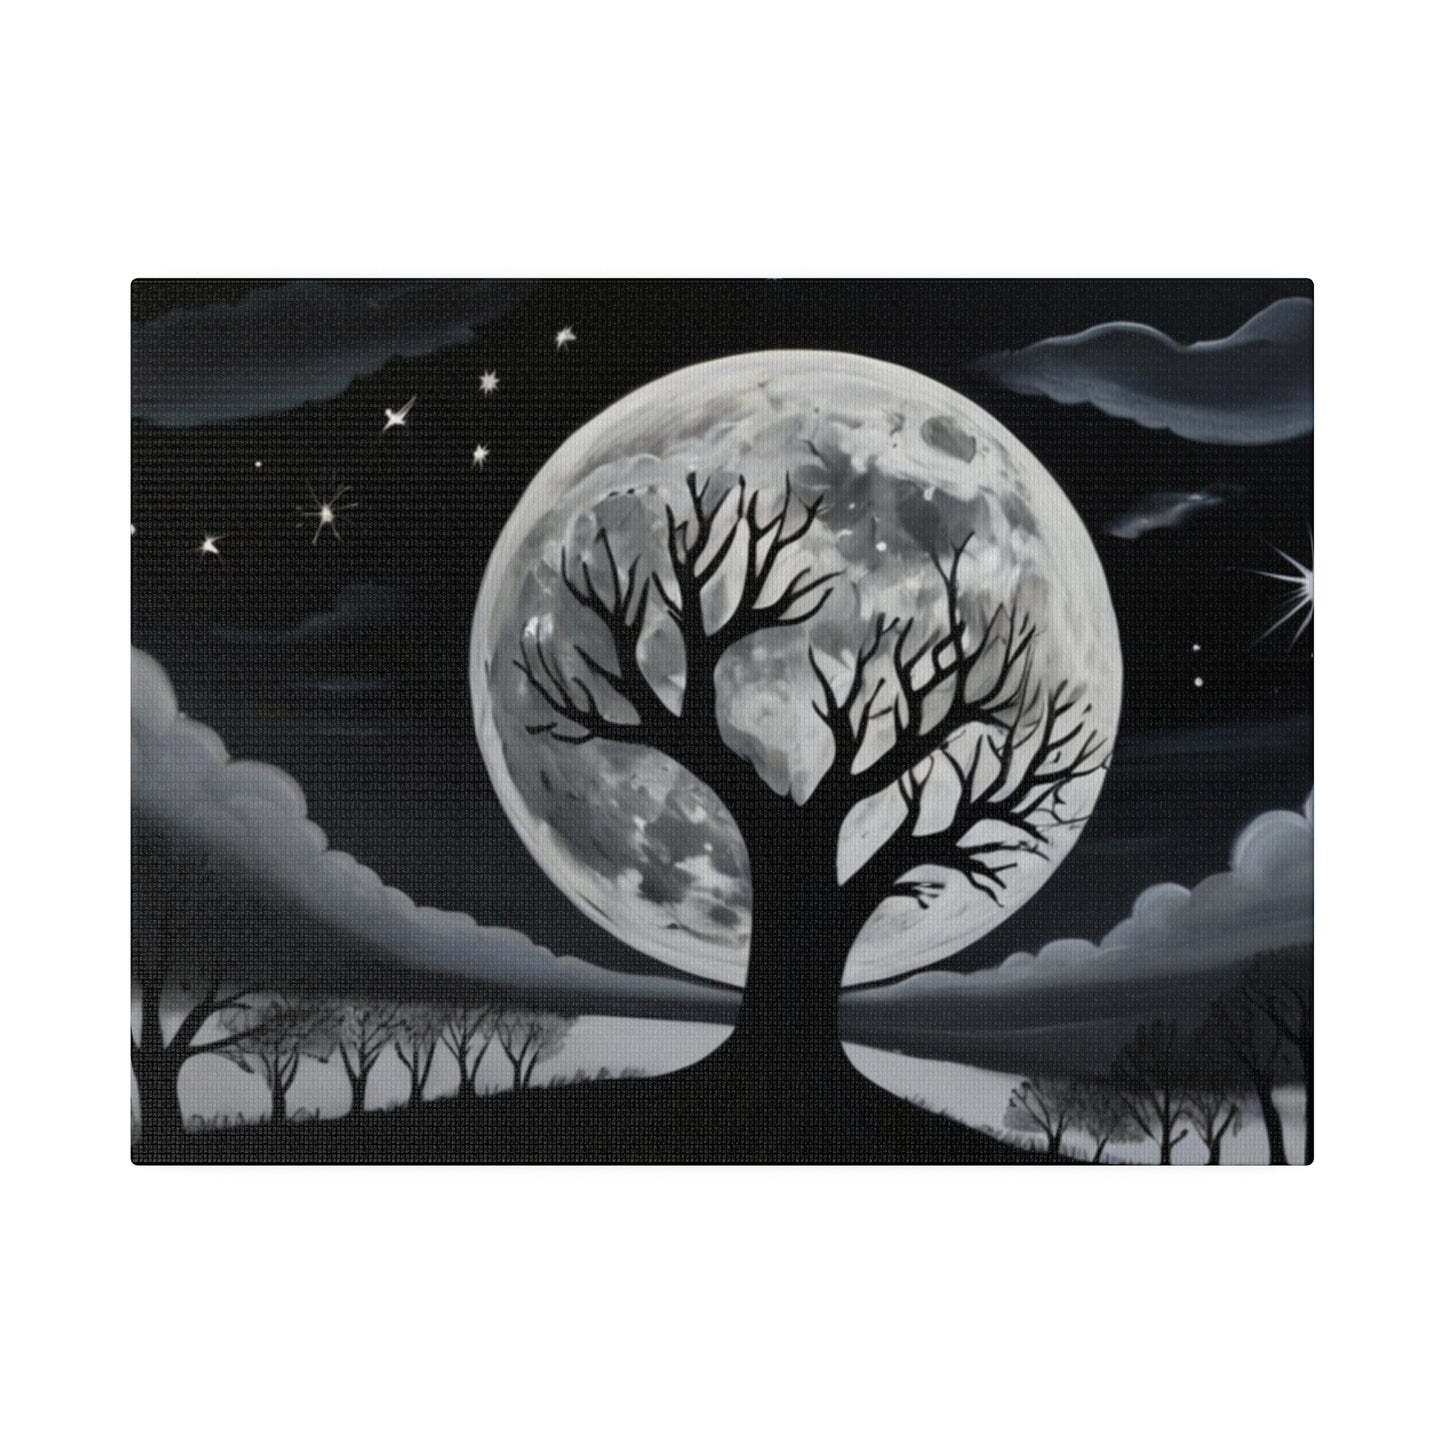 Large Moon Behind Leafless Tree Canvas - Matte Canvas, Stretched, 0.75"